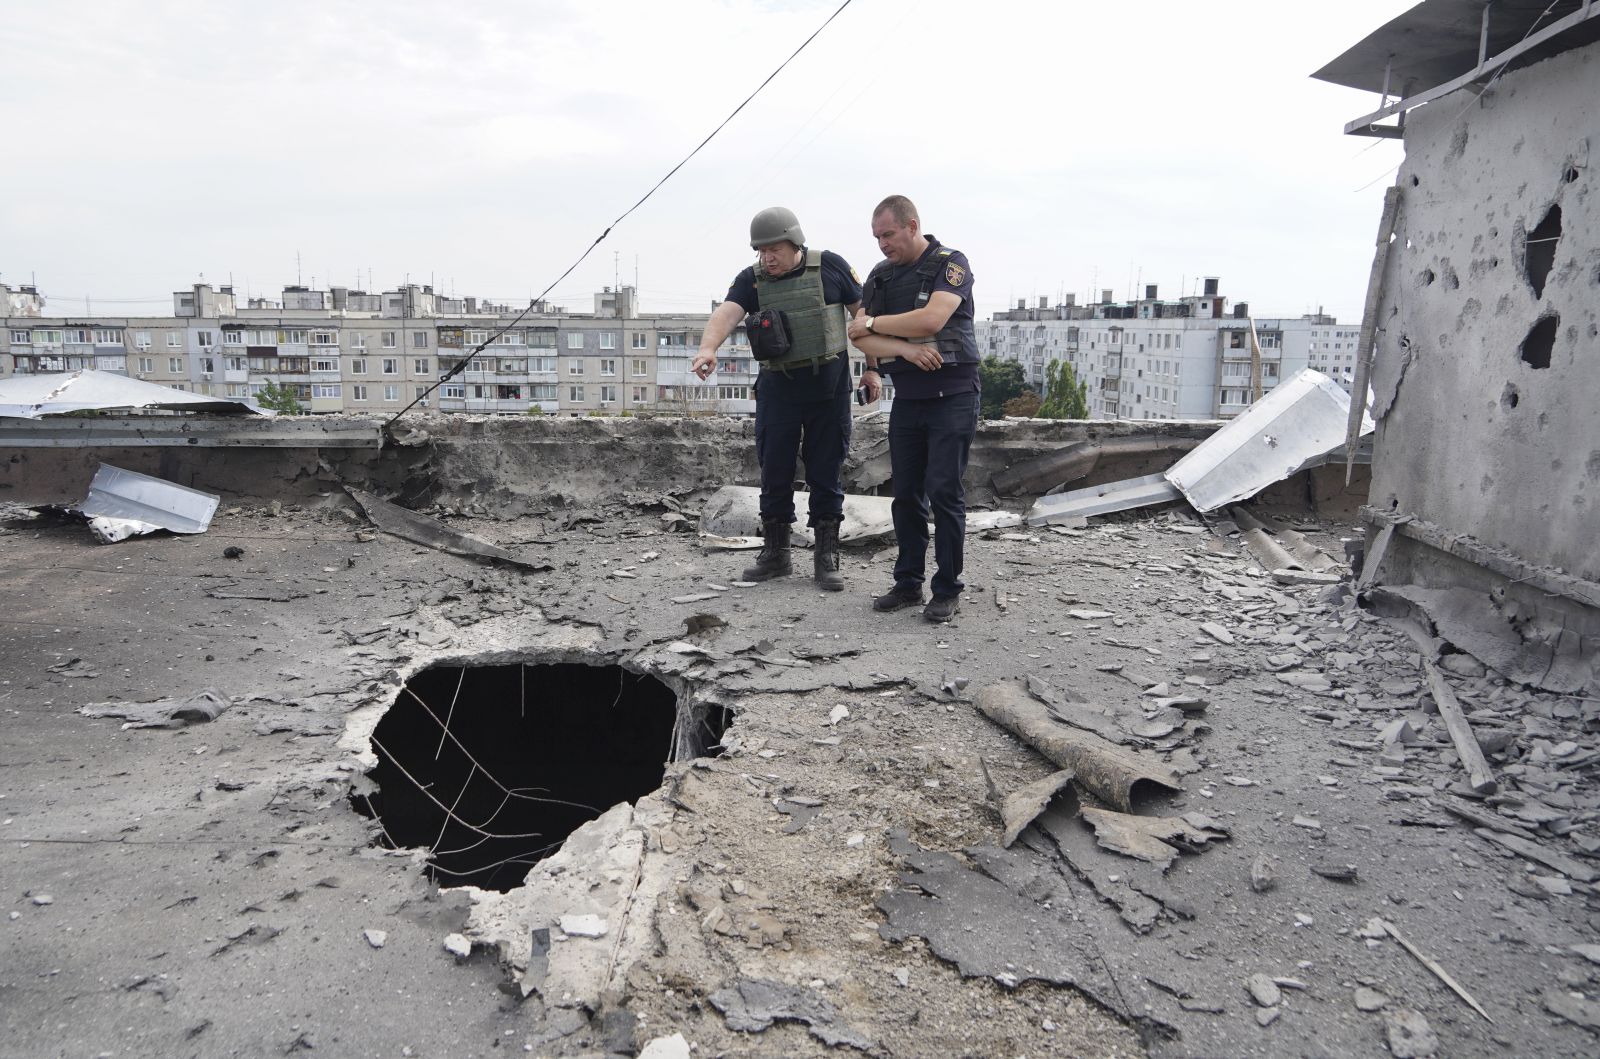 epa10122497 Ukrainian rescuers inspect a shelling hole on the roof of a residential building after a shelling in Kharkiv, Ukraine, 15 August 2022 amid Russia's military invasion. Five people were injured in a result of the shelling, the Ukrainian Rescue Service has reported. Kharkiv and surrounding areas have been the target of heavy shelling since February 2022, when Russian troops entered Ukraine starting a conflict that has provoked destruction and a humanitarian crisis.  EPA/VASILIY ZHLOBSKY